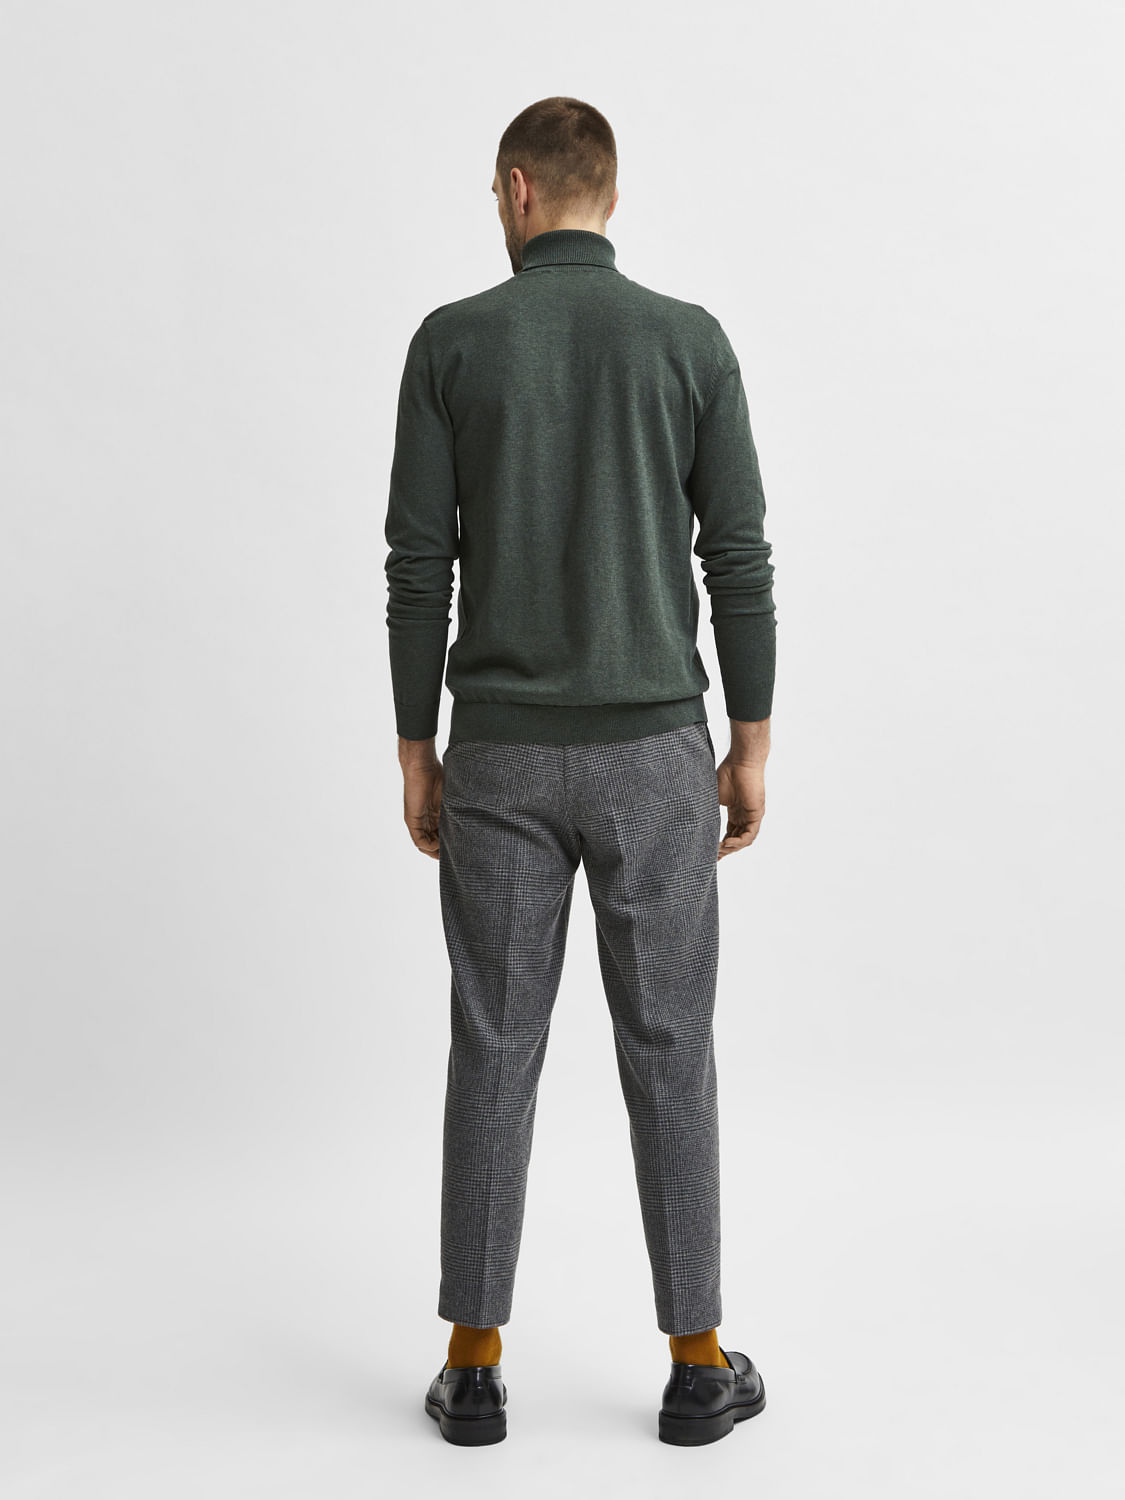 Grey Turtleneck and Trousers Outfit  Teach in Style